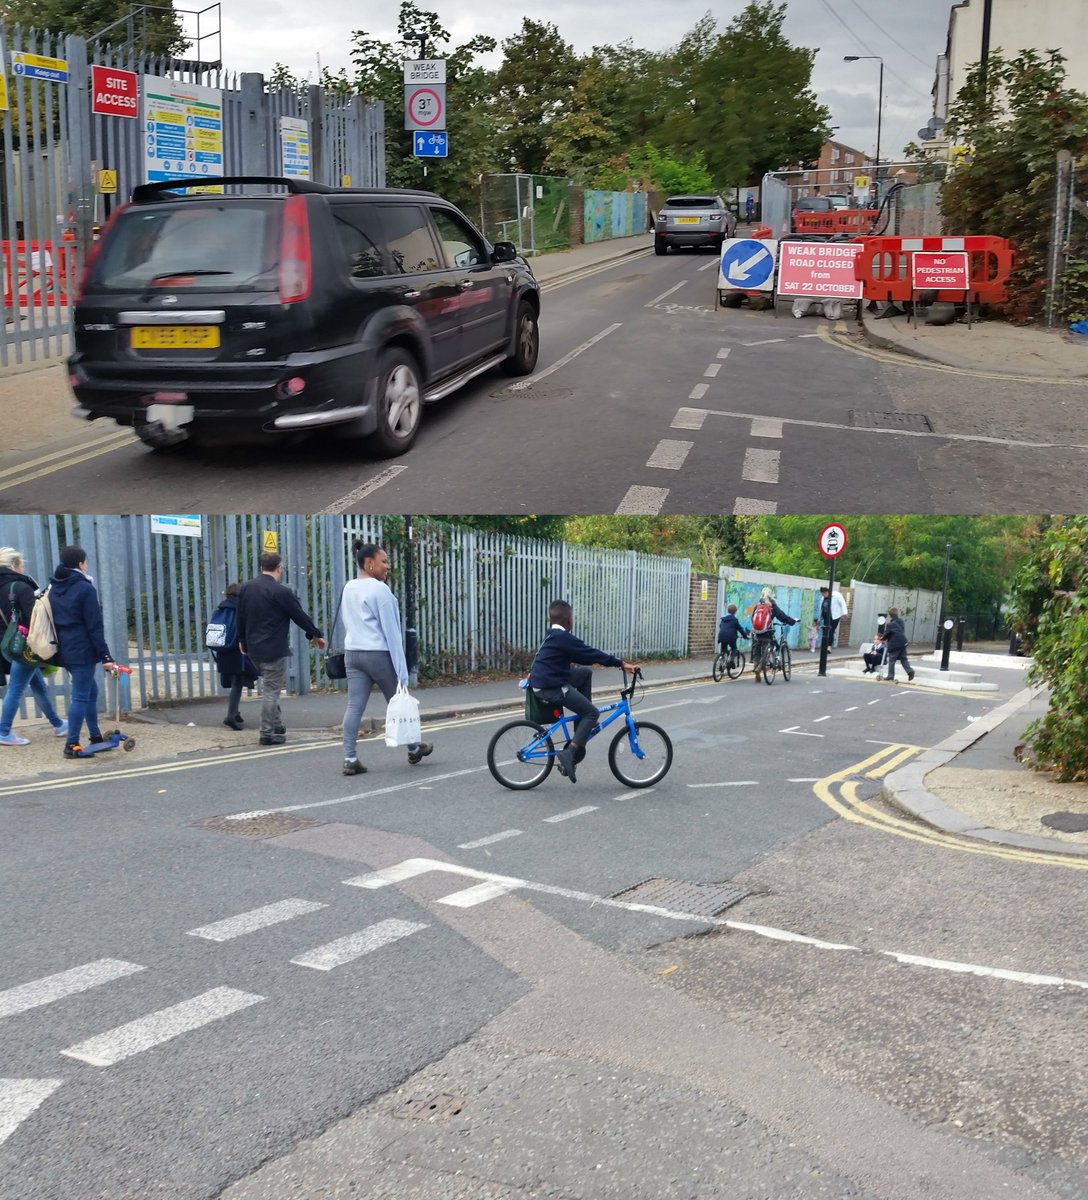 #wfminiholland has transformed the streets around #Stoneydown Park Primary, removing thru traffic thereby prioritising the vulnerable. @CllrCoghill